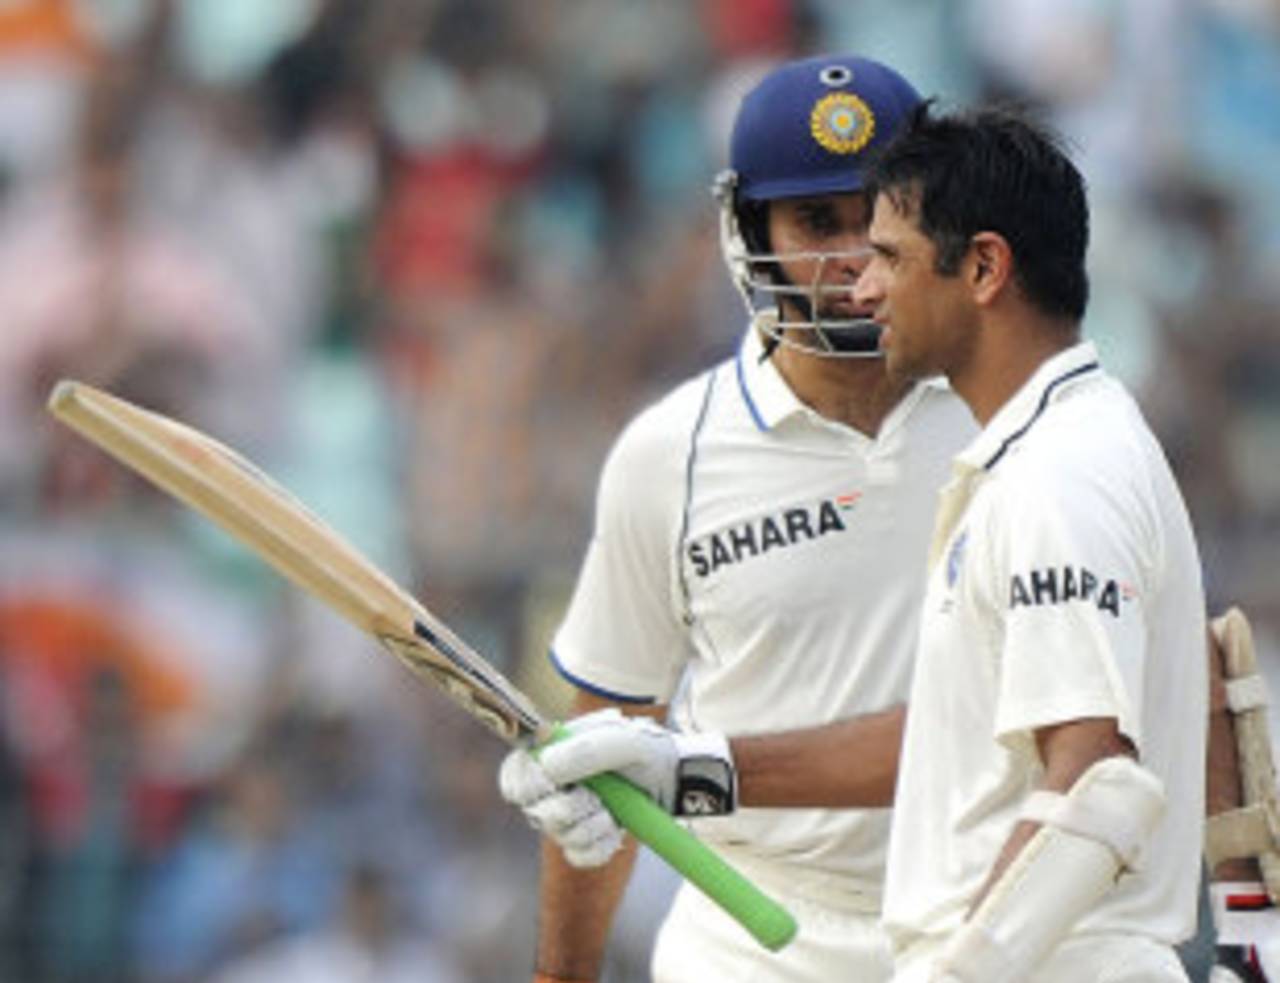 If Dravid and Laxman make hundreds in Kolkata and no one turns up to watch, did it really happen?&nbsp;&nbsp;&bull;&nbsp;&nbsp;AFP